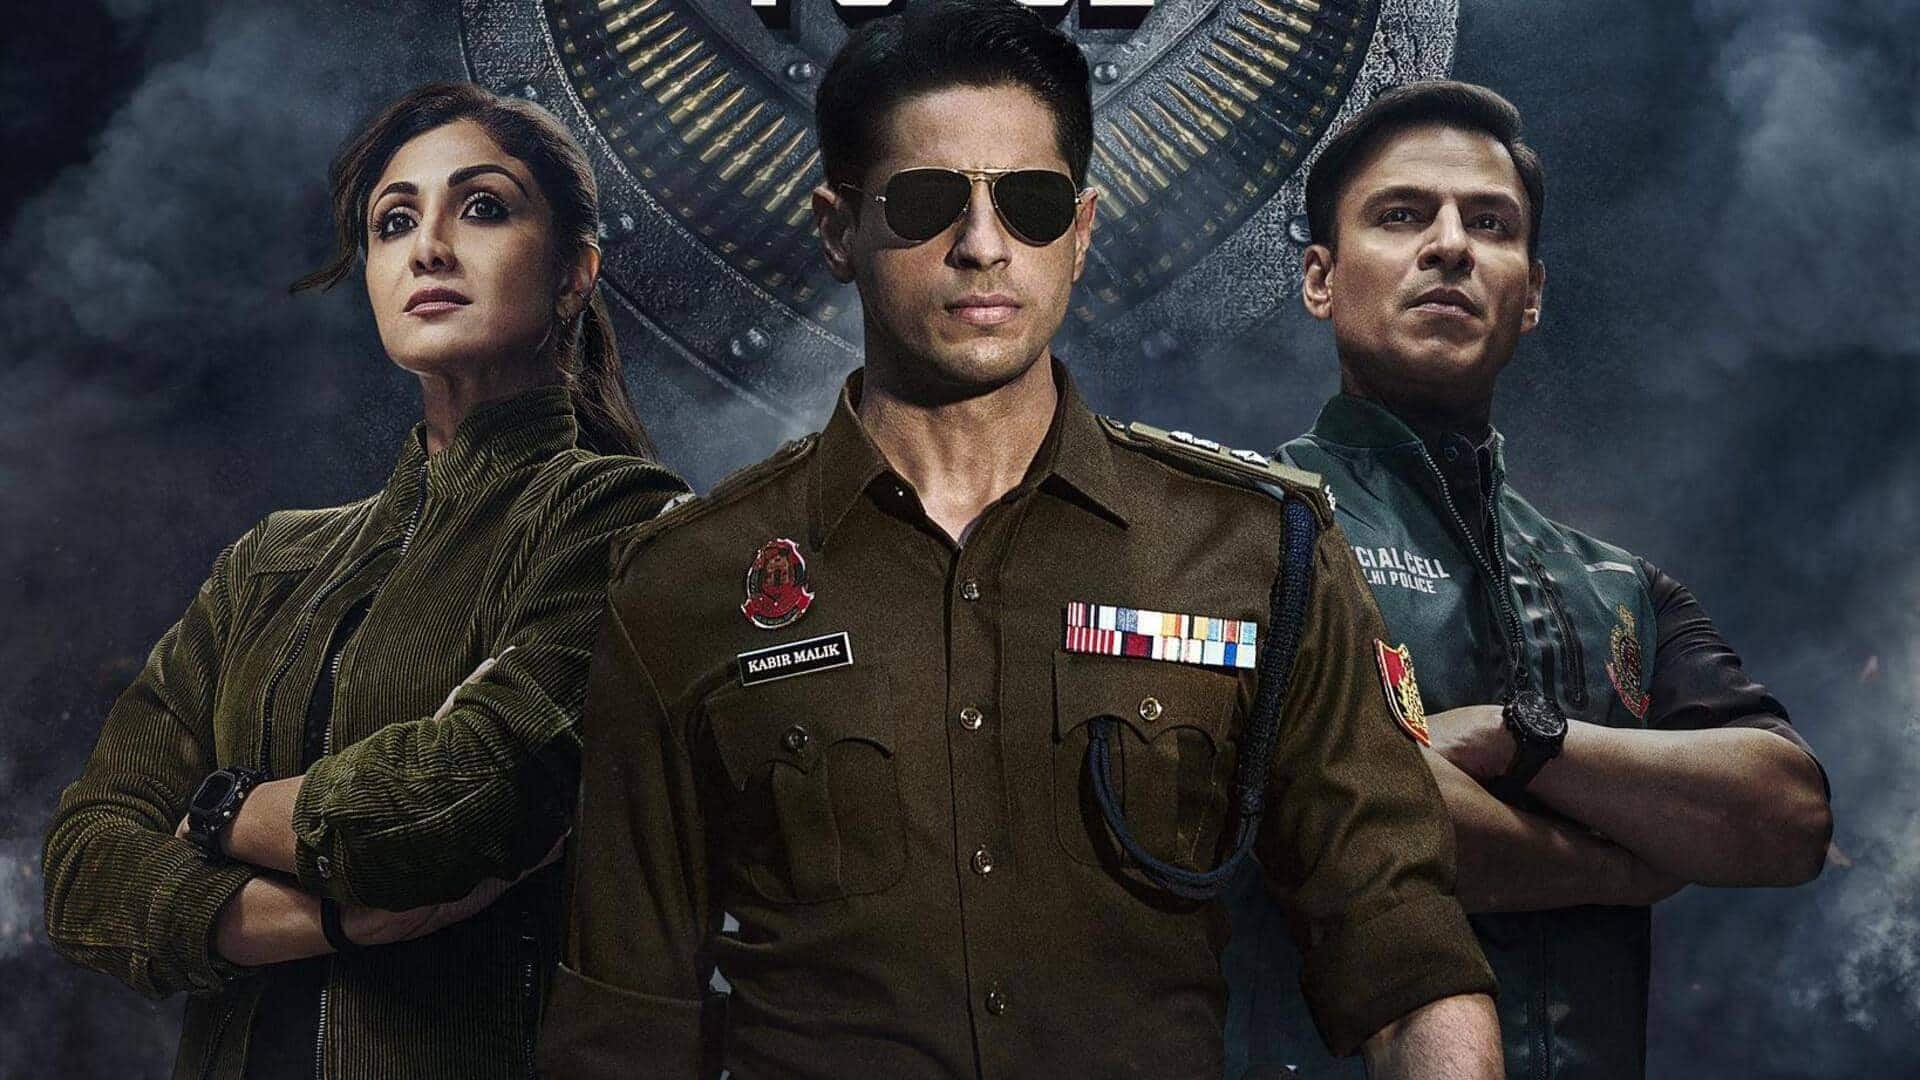 'Indian Police Force' trailer: Sidharth gets ready for jaw-dropping mission